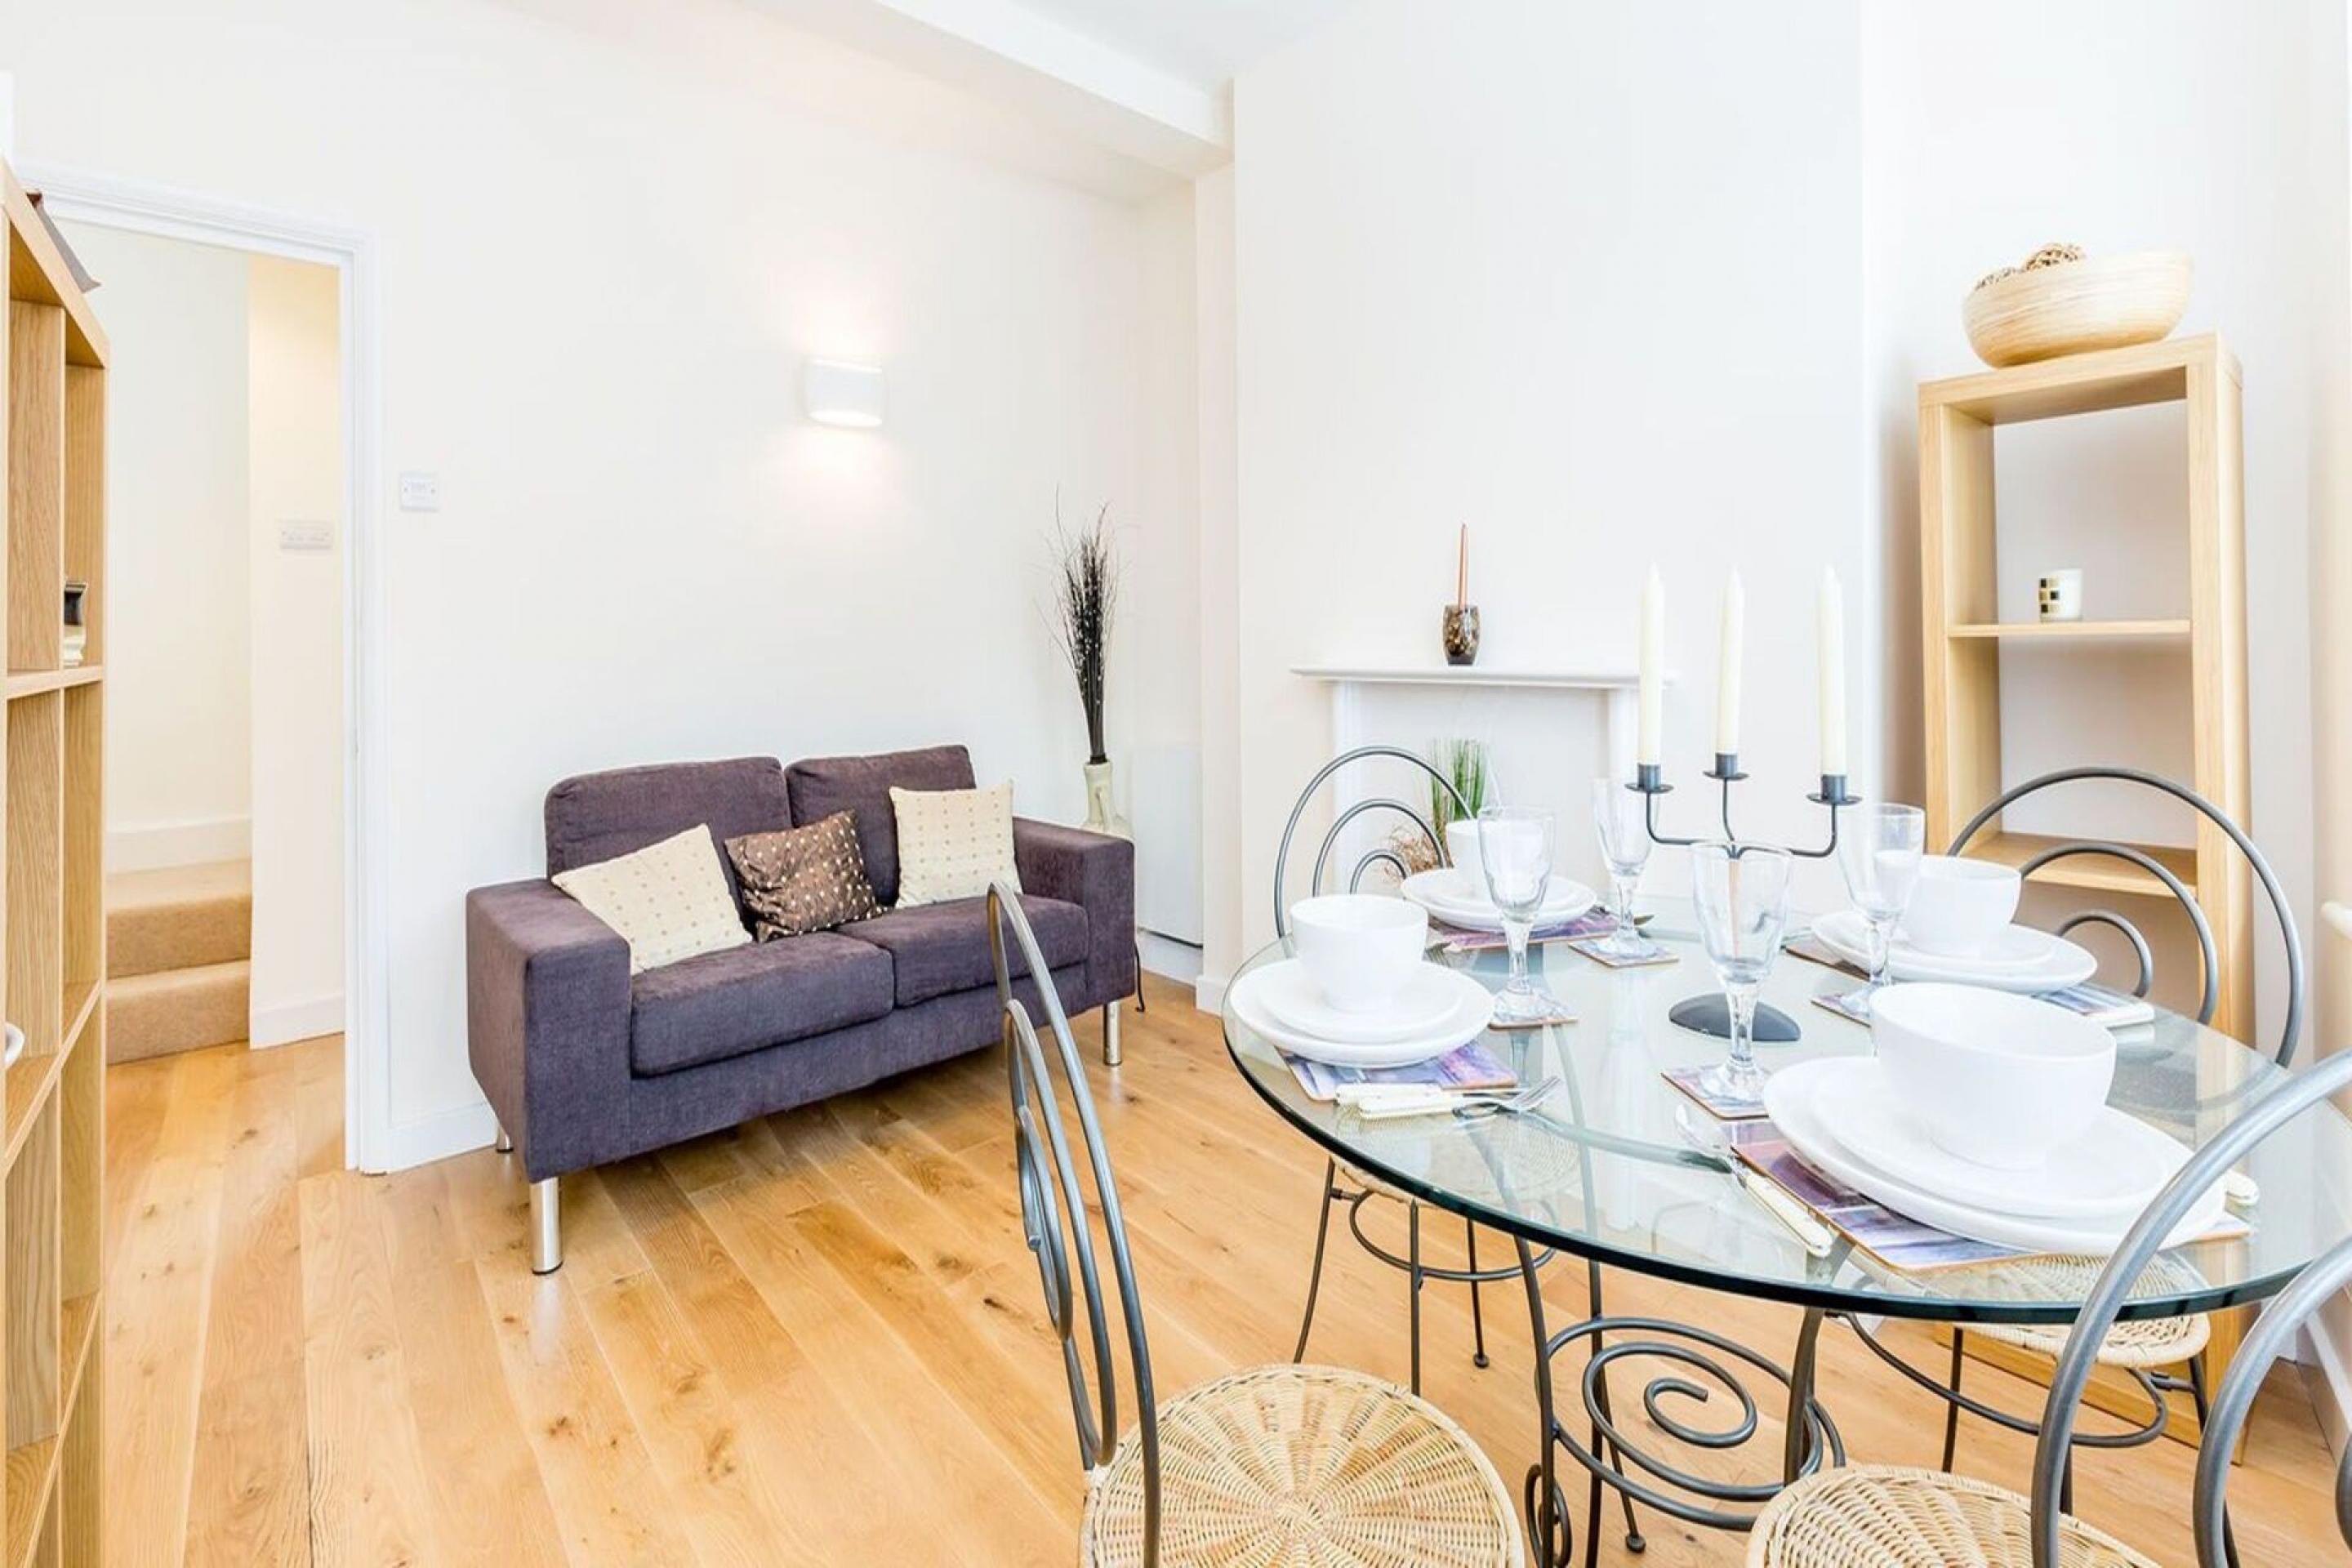 Beautiful split level 2 double bedroom property located minutes to Angel Station Chapel Market, N1, Angel N1